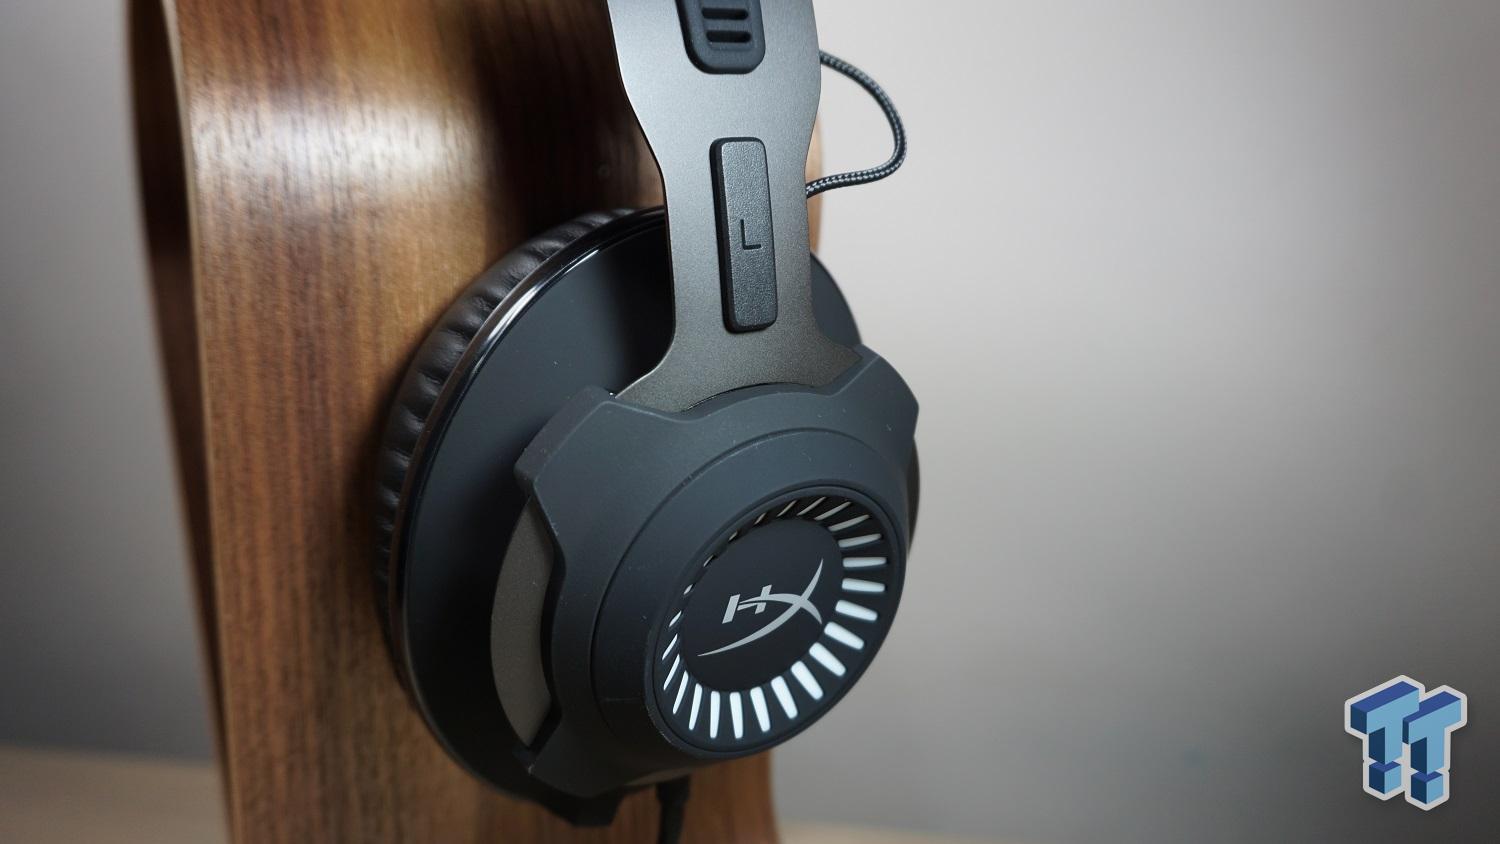 HyperX Cloud Revolver S Gaming Headset Review